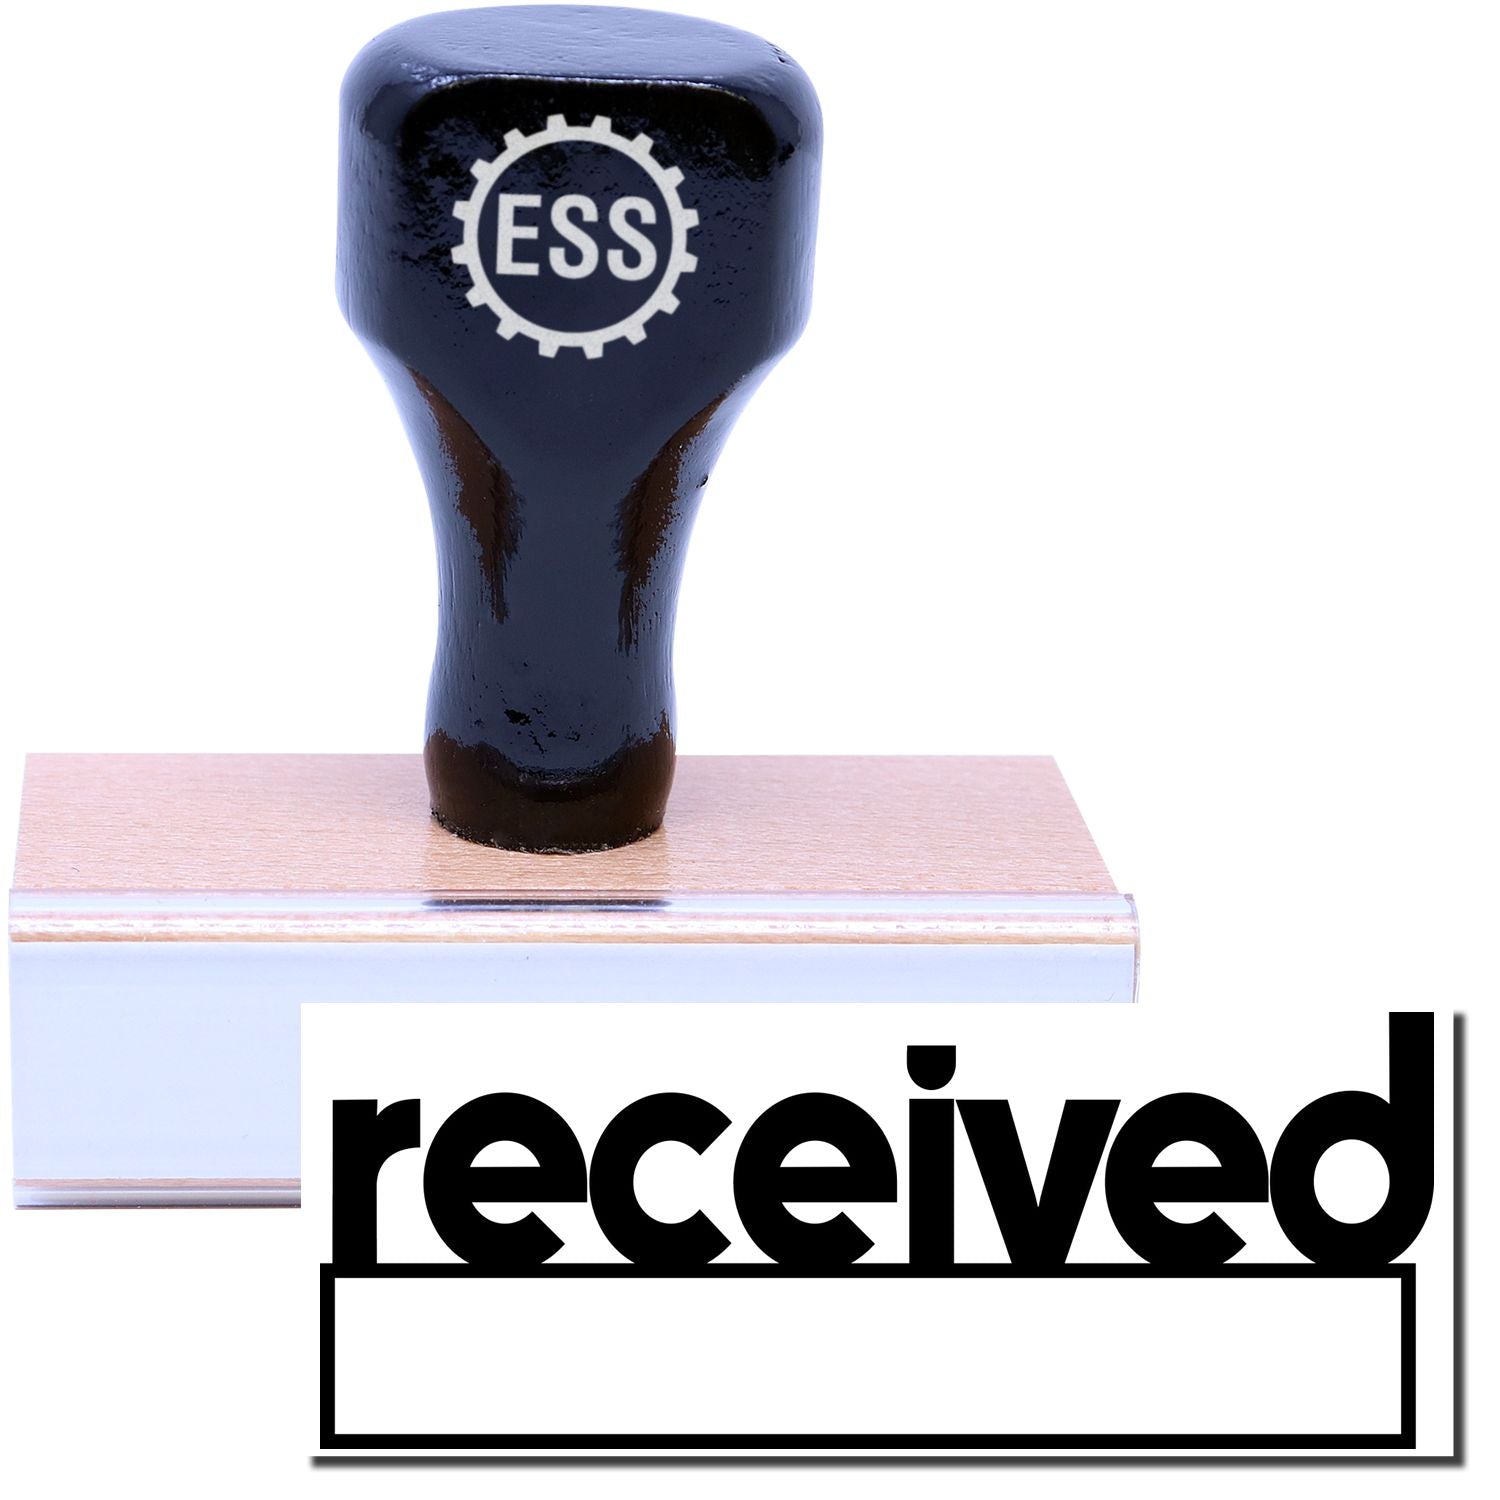 A stock office rubber stamp with a stamped image showing how the text "received" in a large lowercase font with a date box is displayed after stamping.